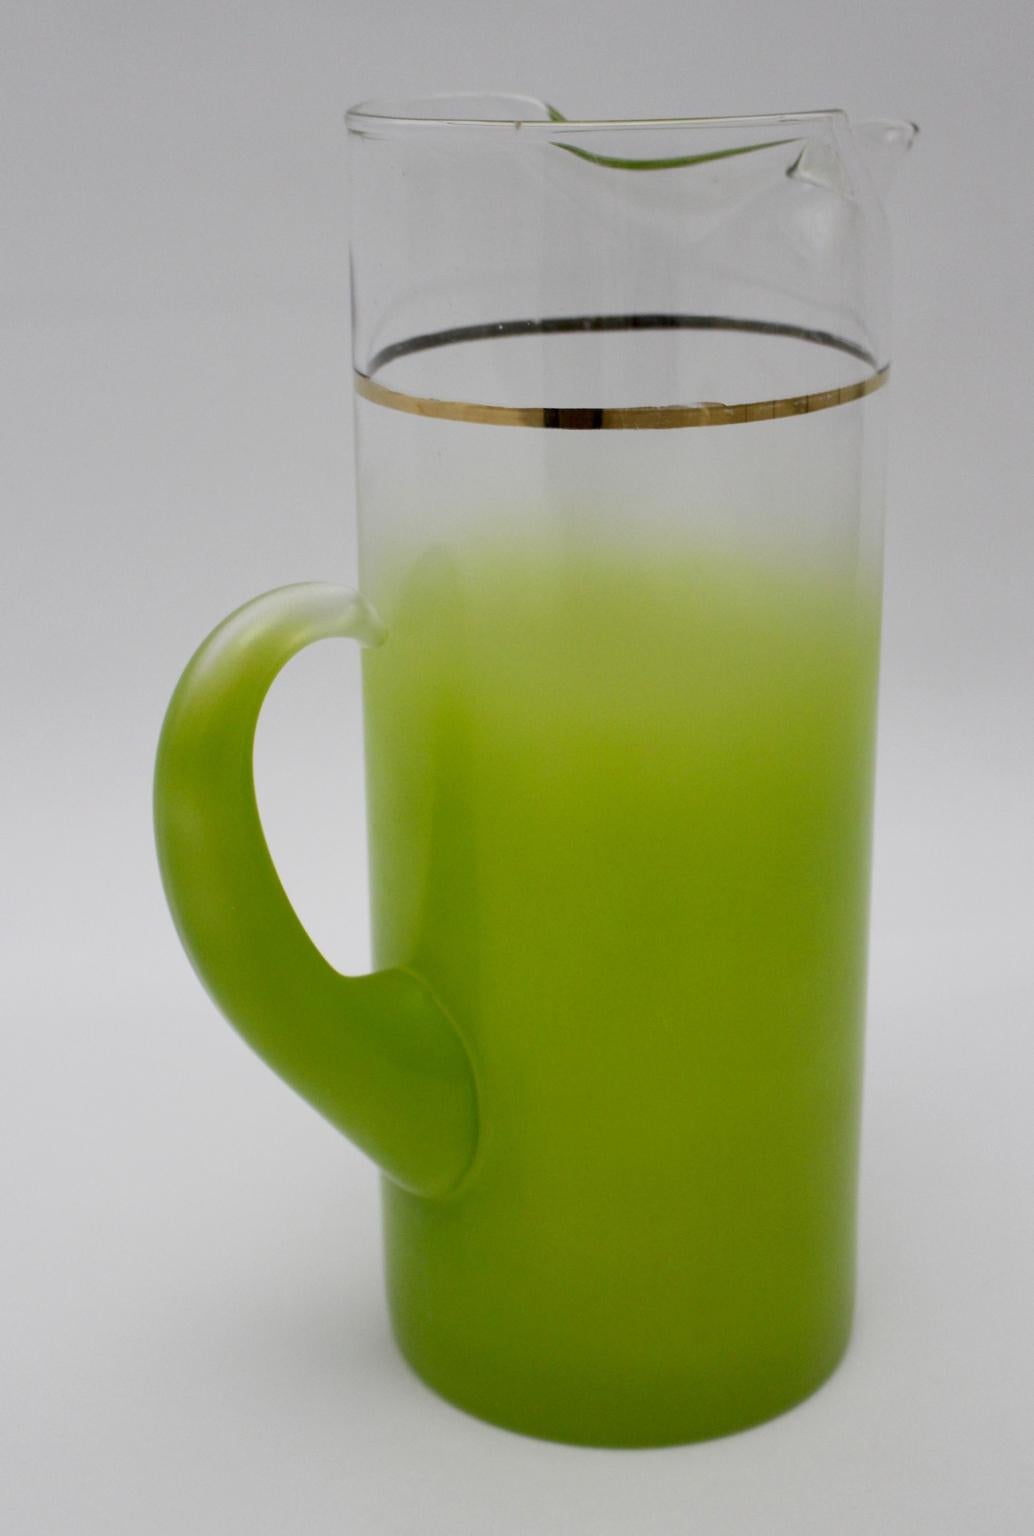 A green charming vintage pitcher, which has a capacity of 2 liters.
The material of this barware is clear glass and the color goes from clear into green, furthermore the glass pitcher is decorated with a fine golden stripe.
The vintage condition is